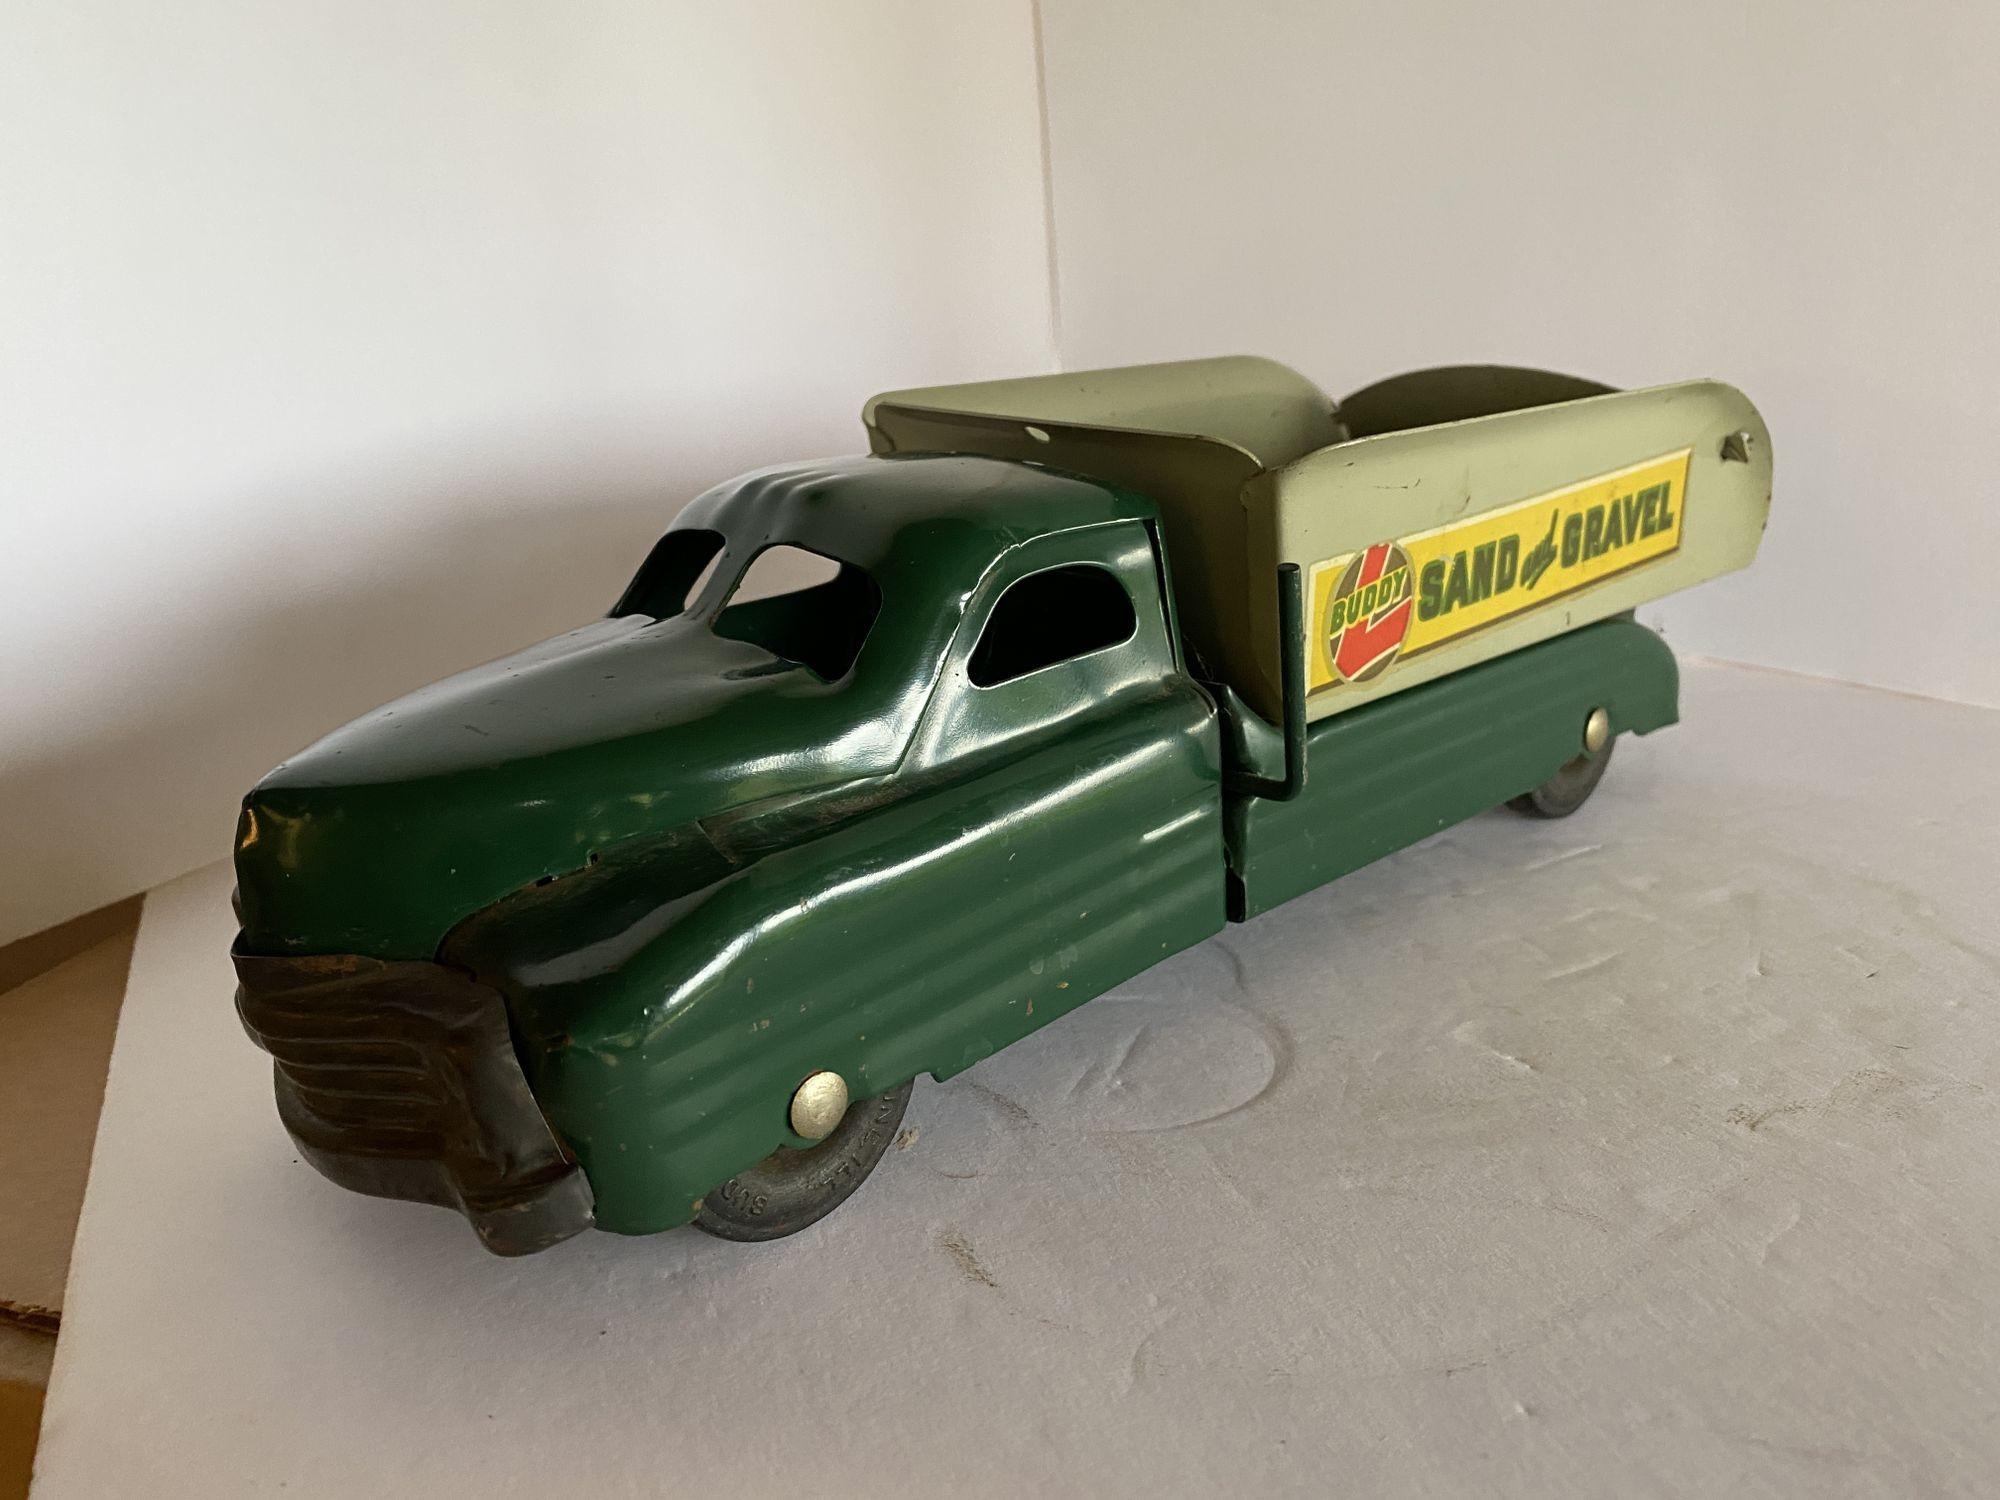 

Circa 1940 Buddy L Sand and Gravel dump truck, fully restored and repainted, in perfect shape and working condition, with some dirt spots on the wheels, minor discoloration on one wheel, and the original decals on both sides showing the markings